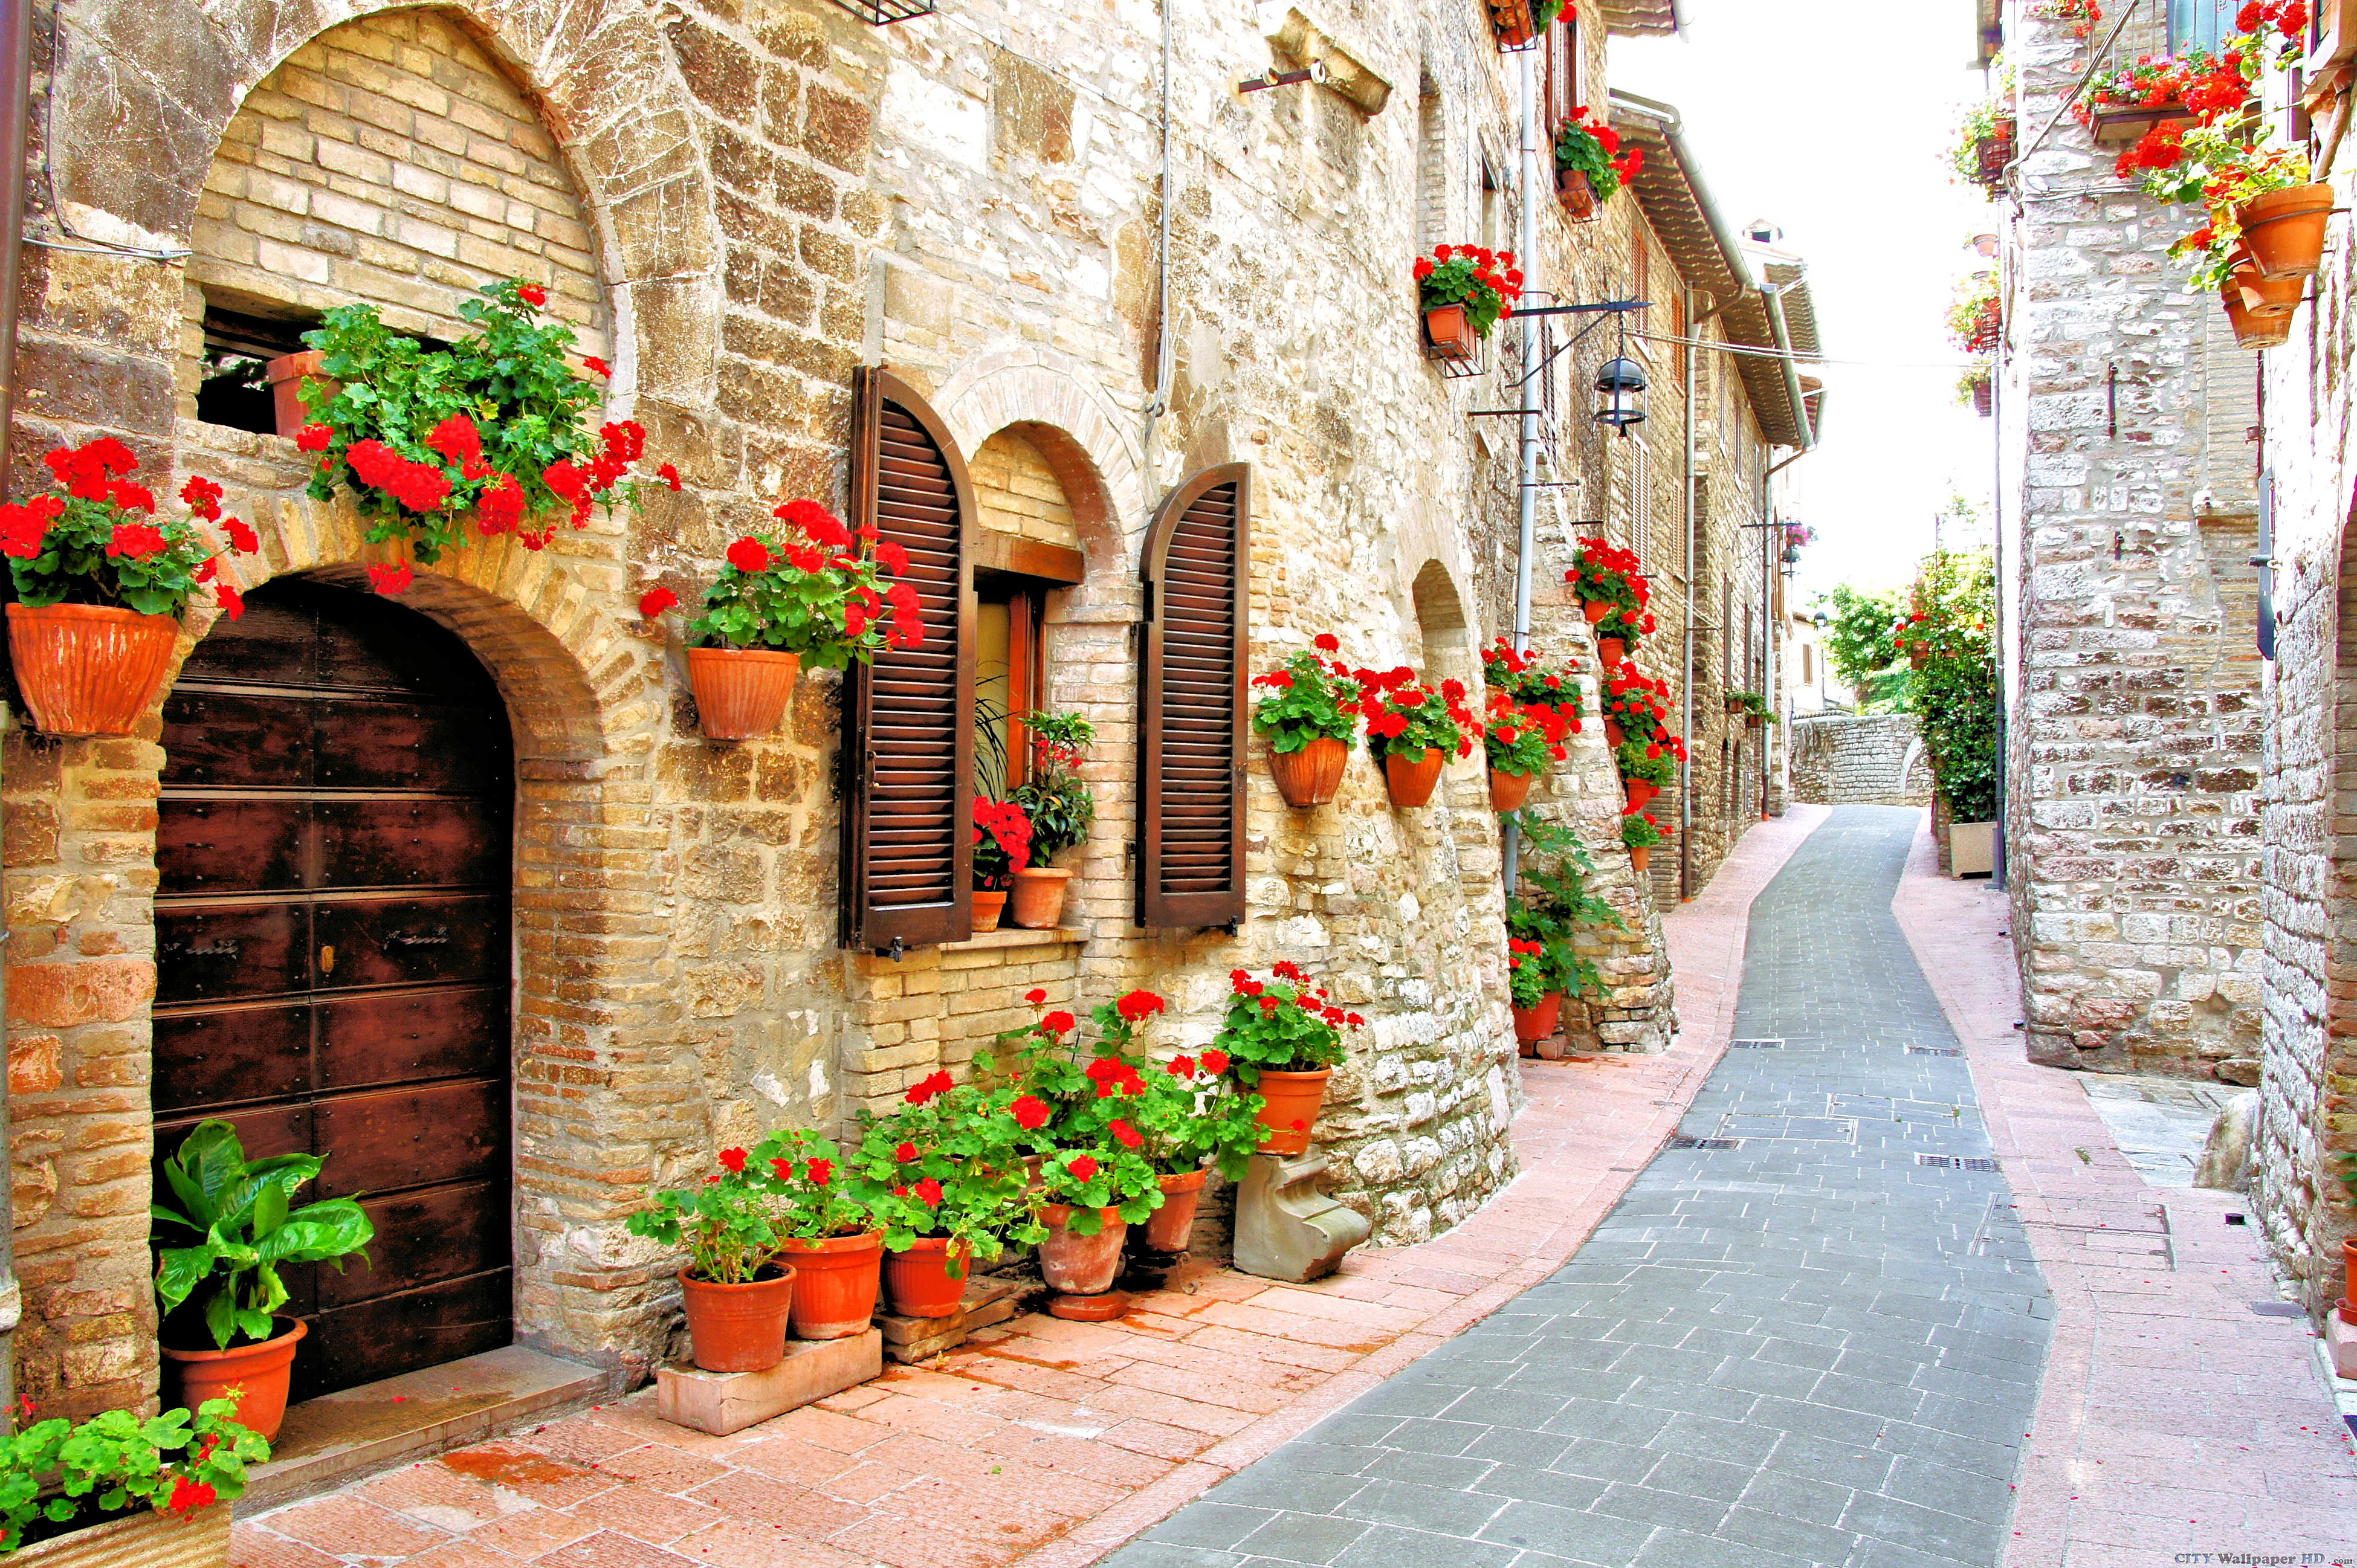 Beautiful Italy wallpaper. Cities around the world. Italy, buildings, street, flowers, day, lantern